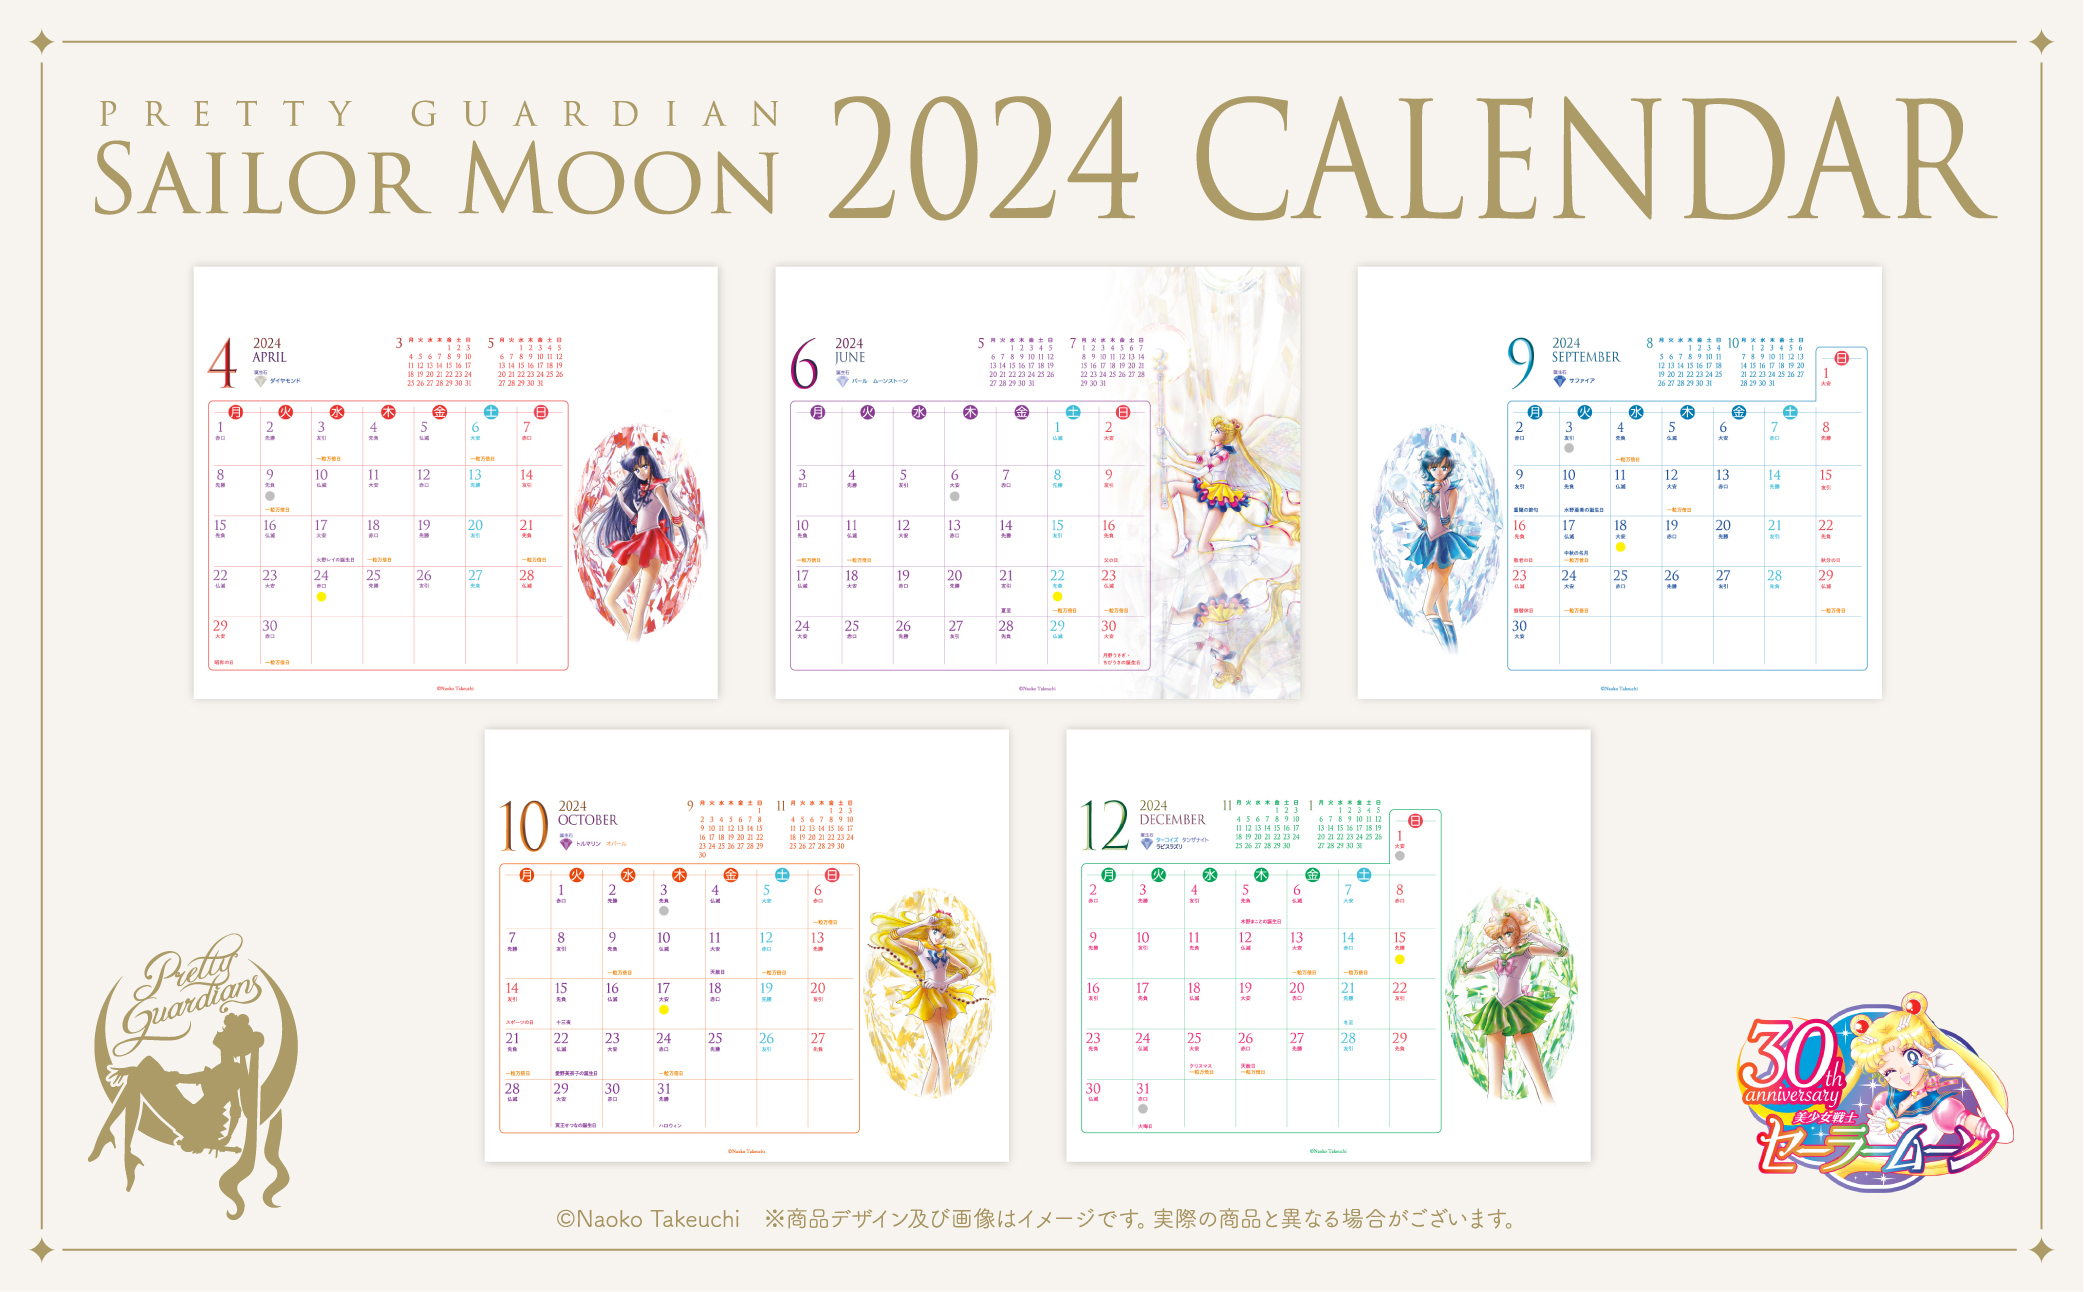 【Limited quantity for Pretty Guardians members only】“Pretty Guardian Sailor Moon” 2024 Calendar